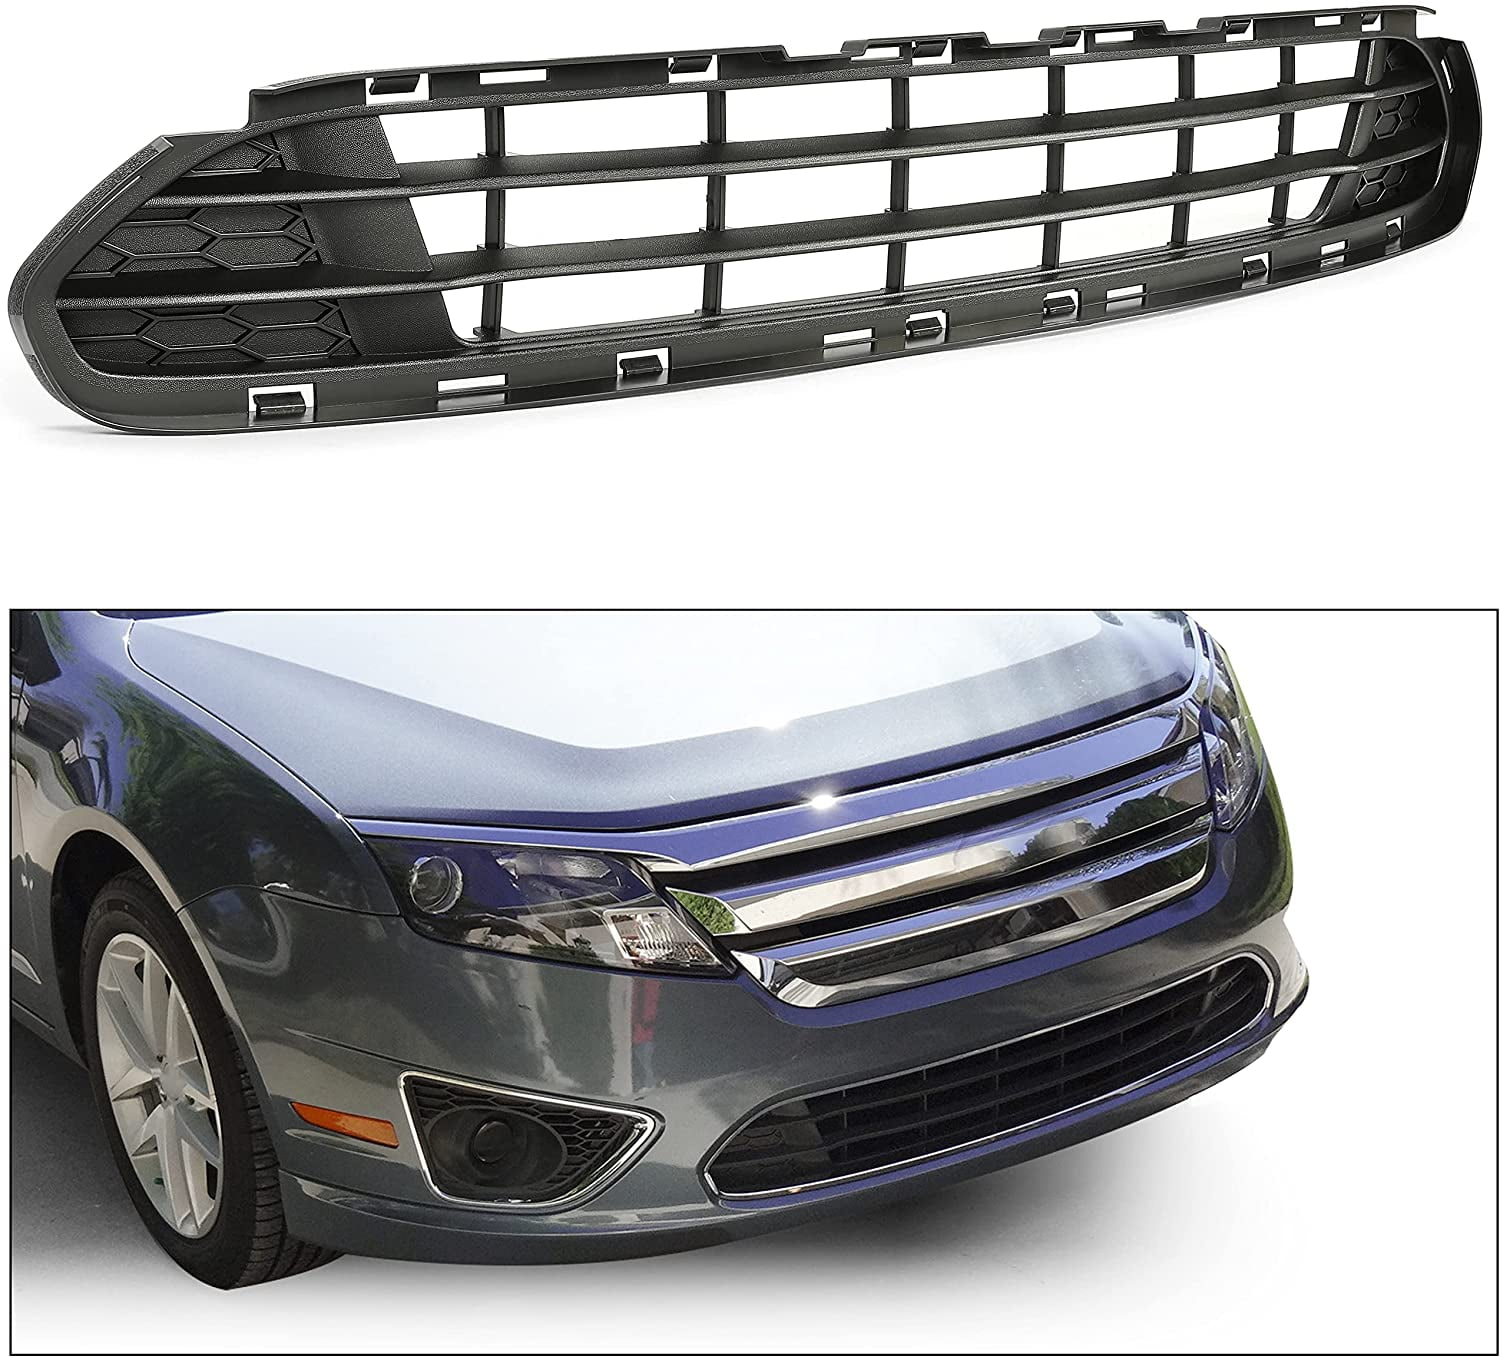 CPP Chrome Plastic Grille Trim for 2010-2012 Ford Fusion FO1037101 